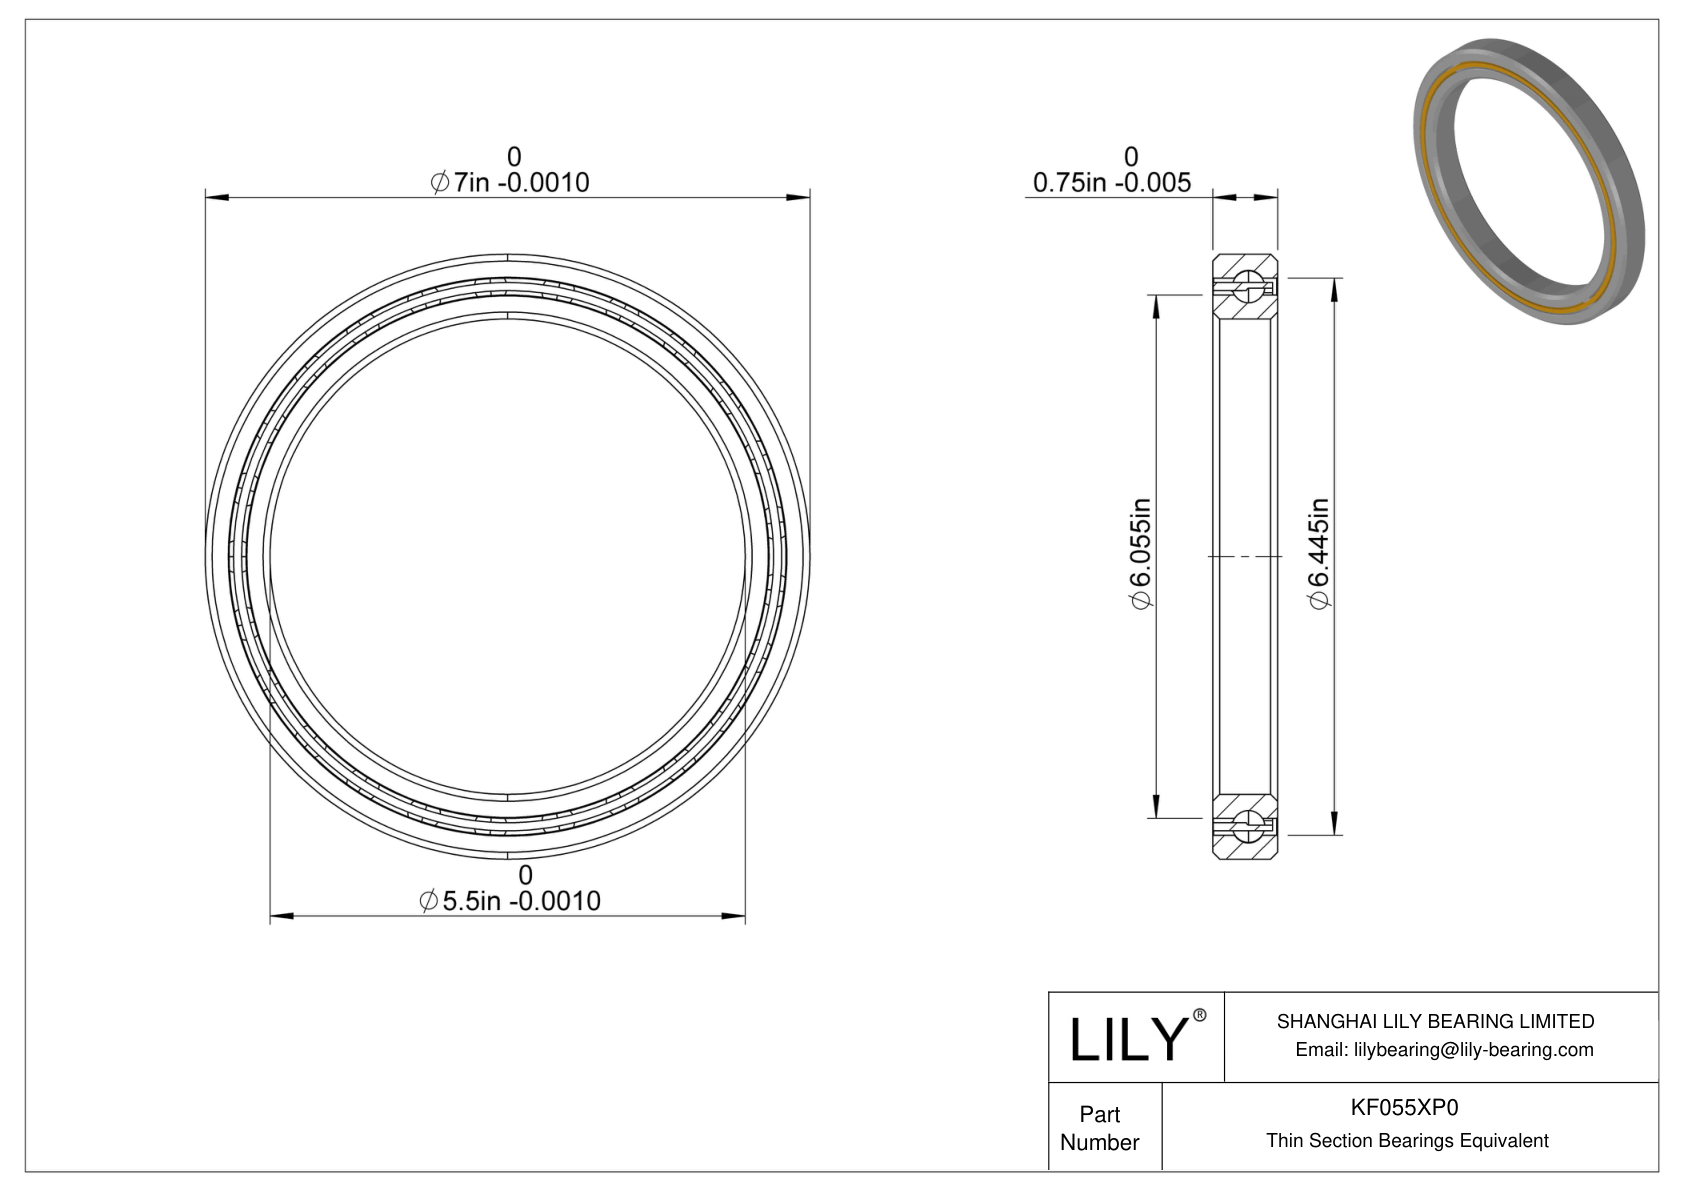 KF055XP0 Constant Section (CS) Bearings cad drawing